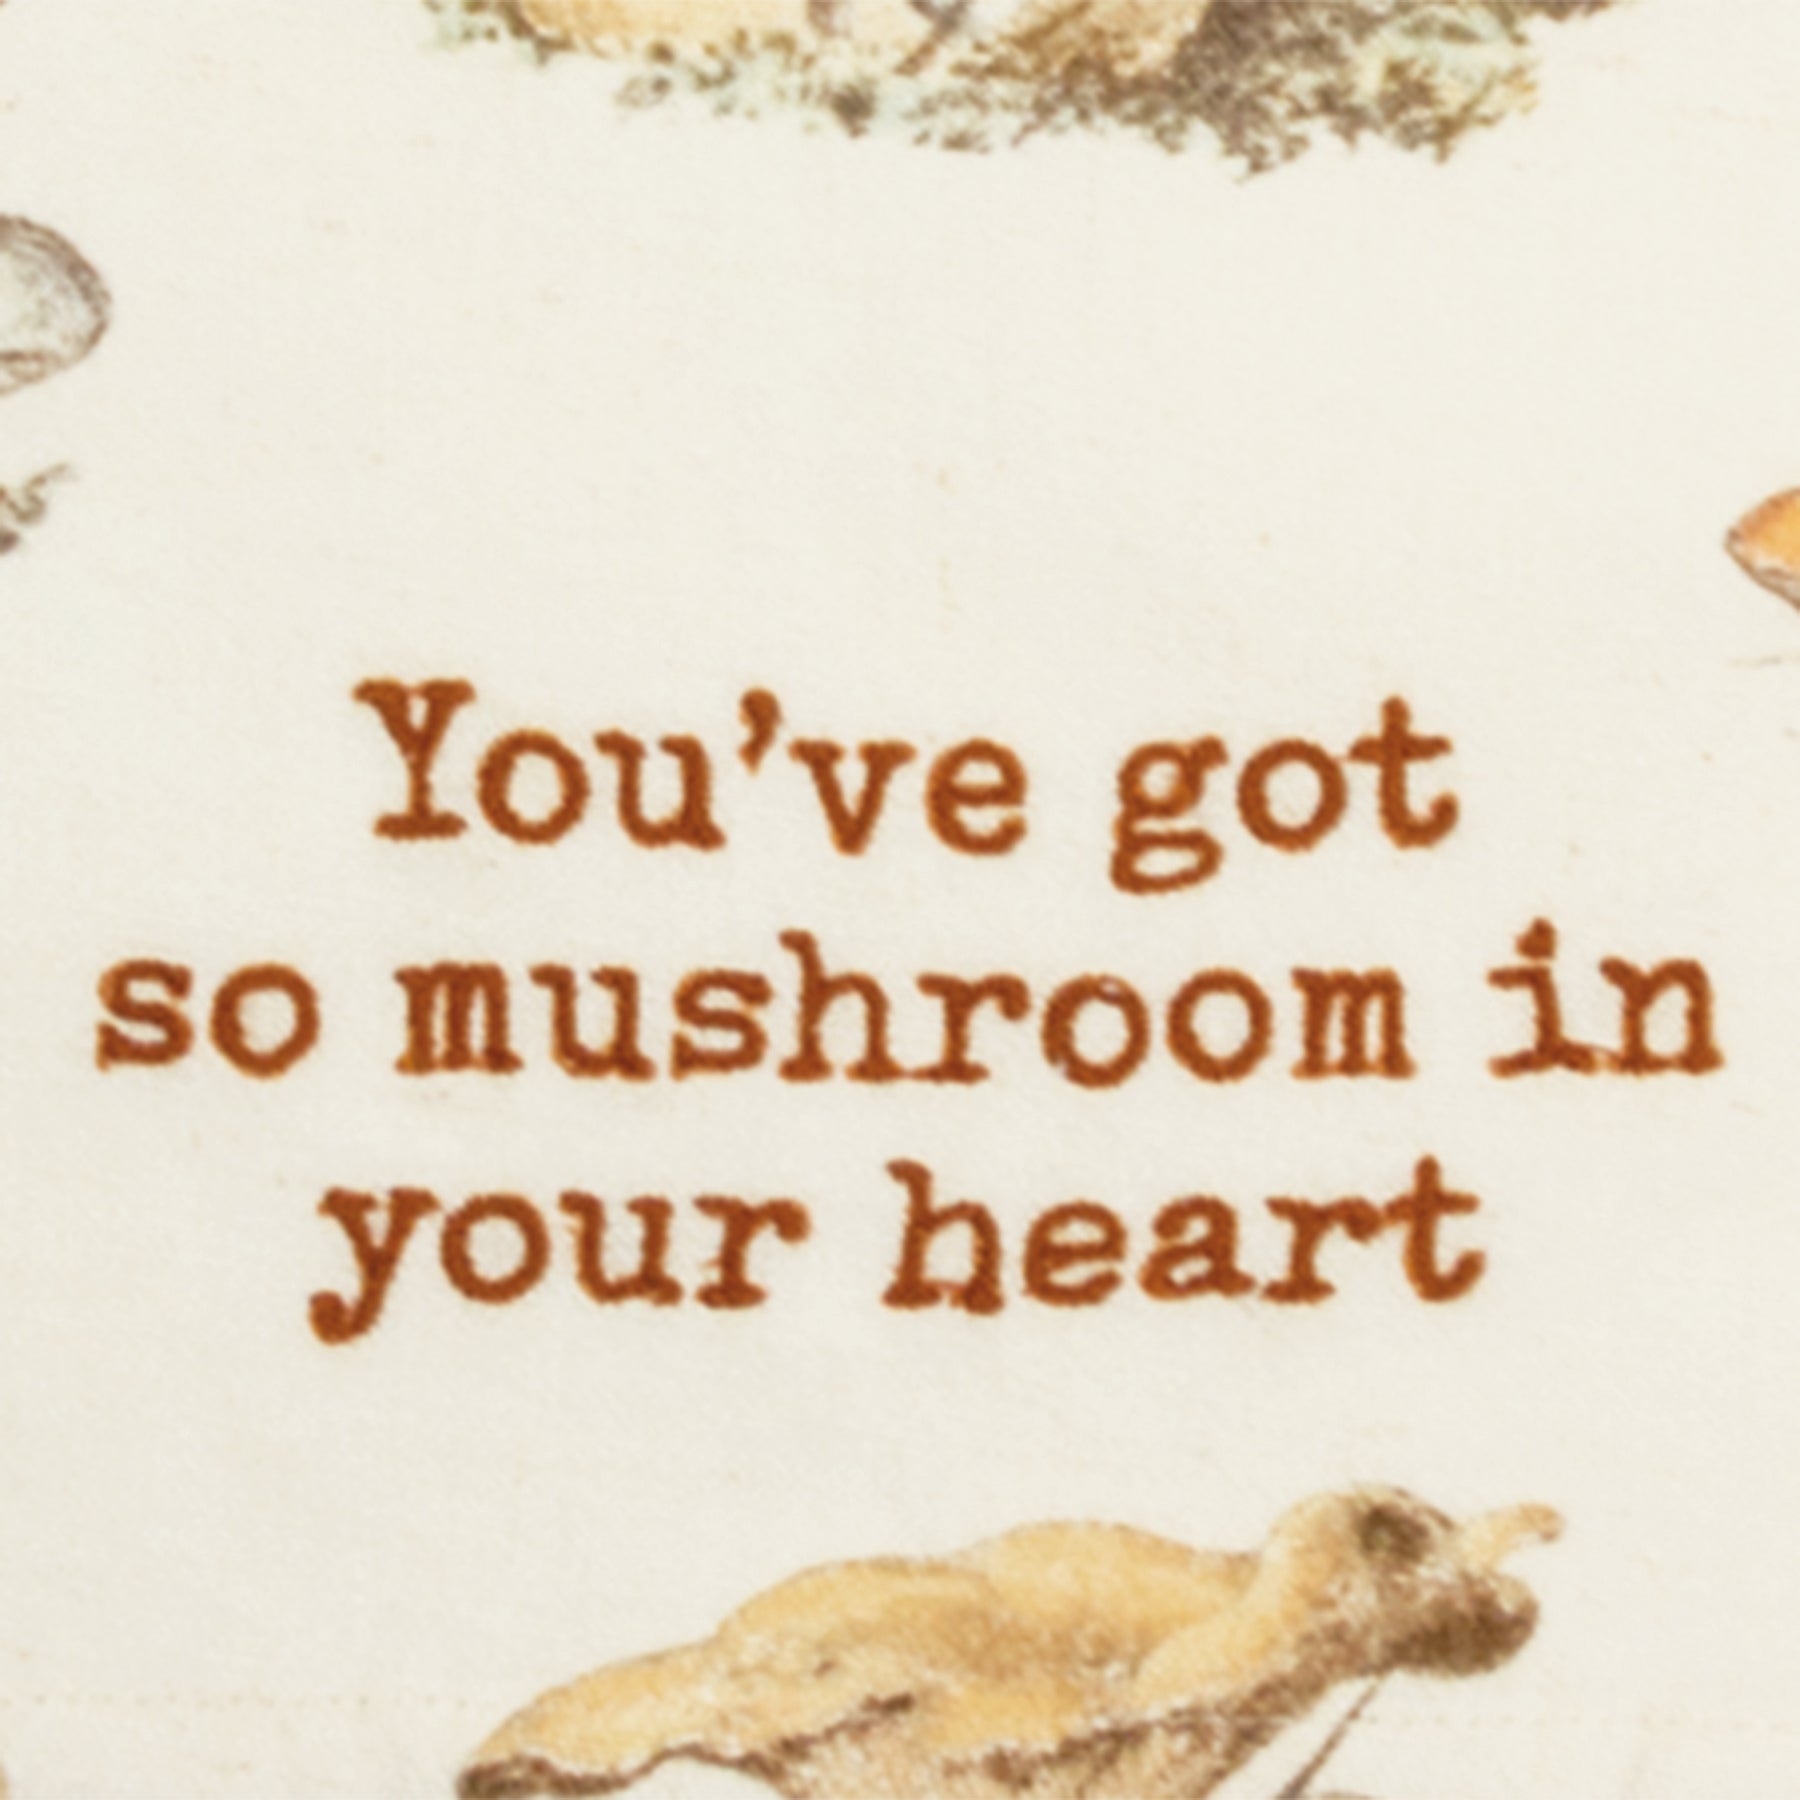 You've Got So Mushroom In Your Heart Funny Dish Cloth Towel | Cotton and Linen | Embroidered Text | 18" x 28"